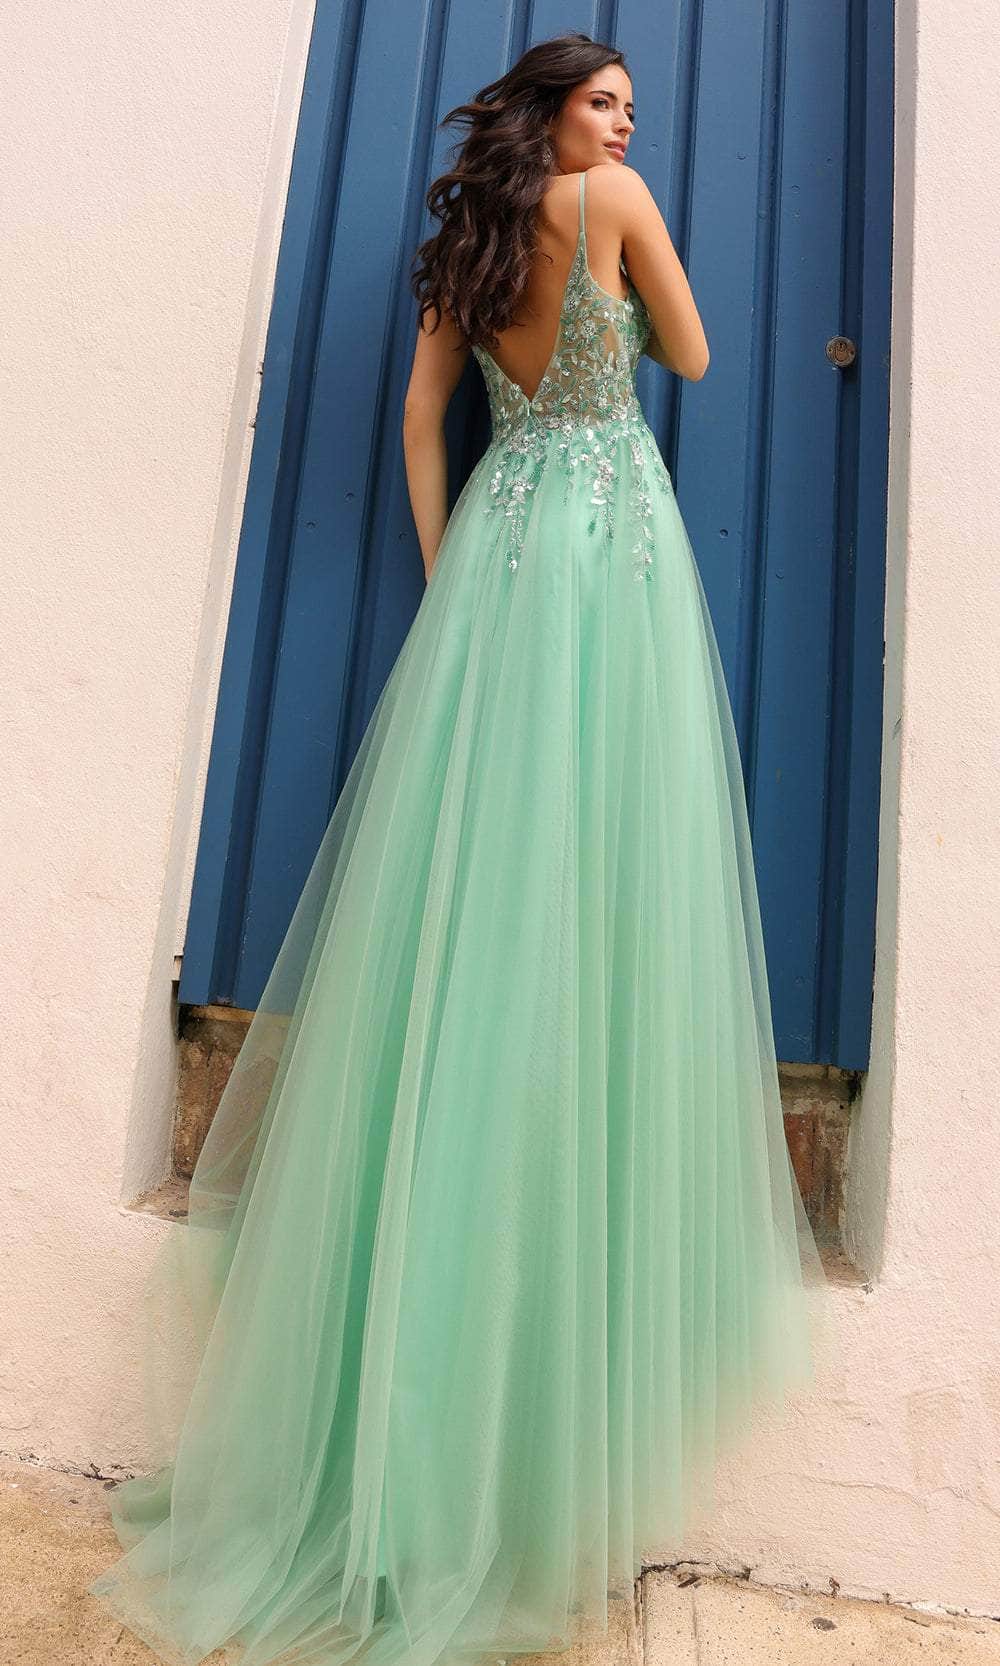 Nox Anabel Q1391 - Plunging V-Back Prom Dress Special Occasion Dresses 